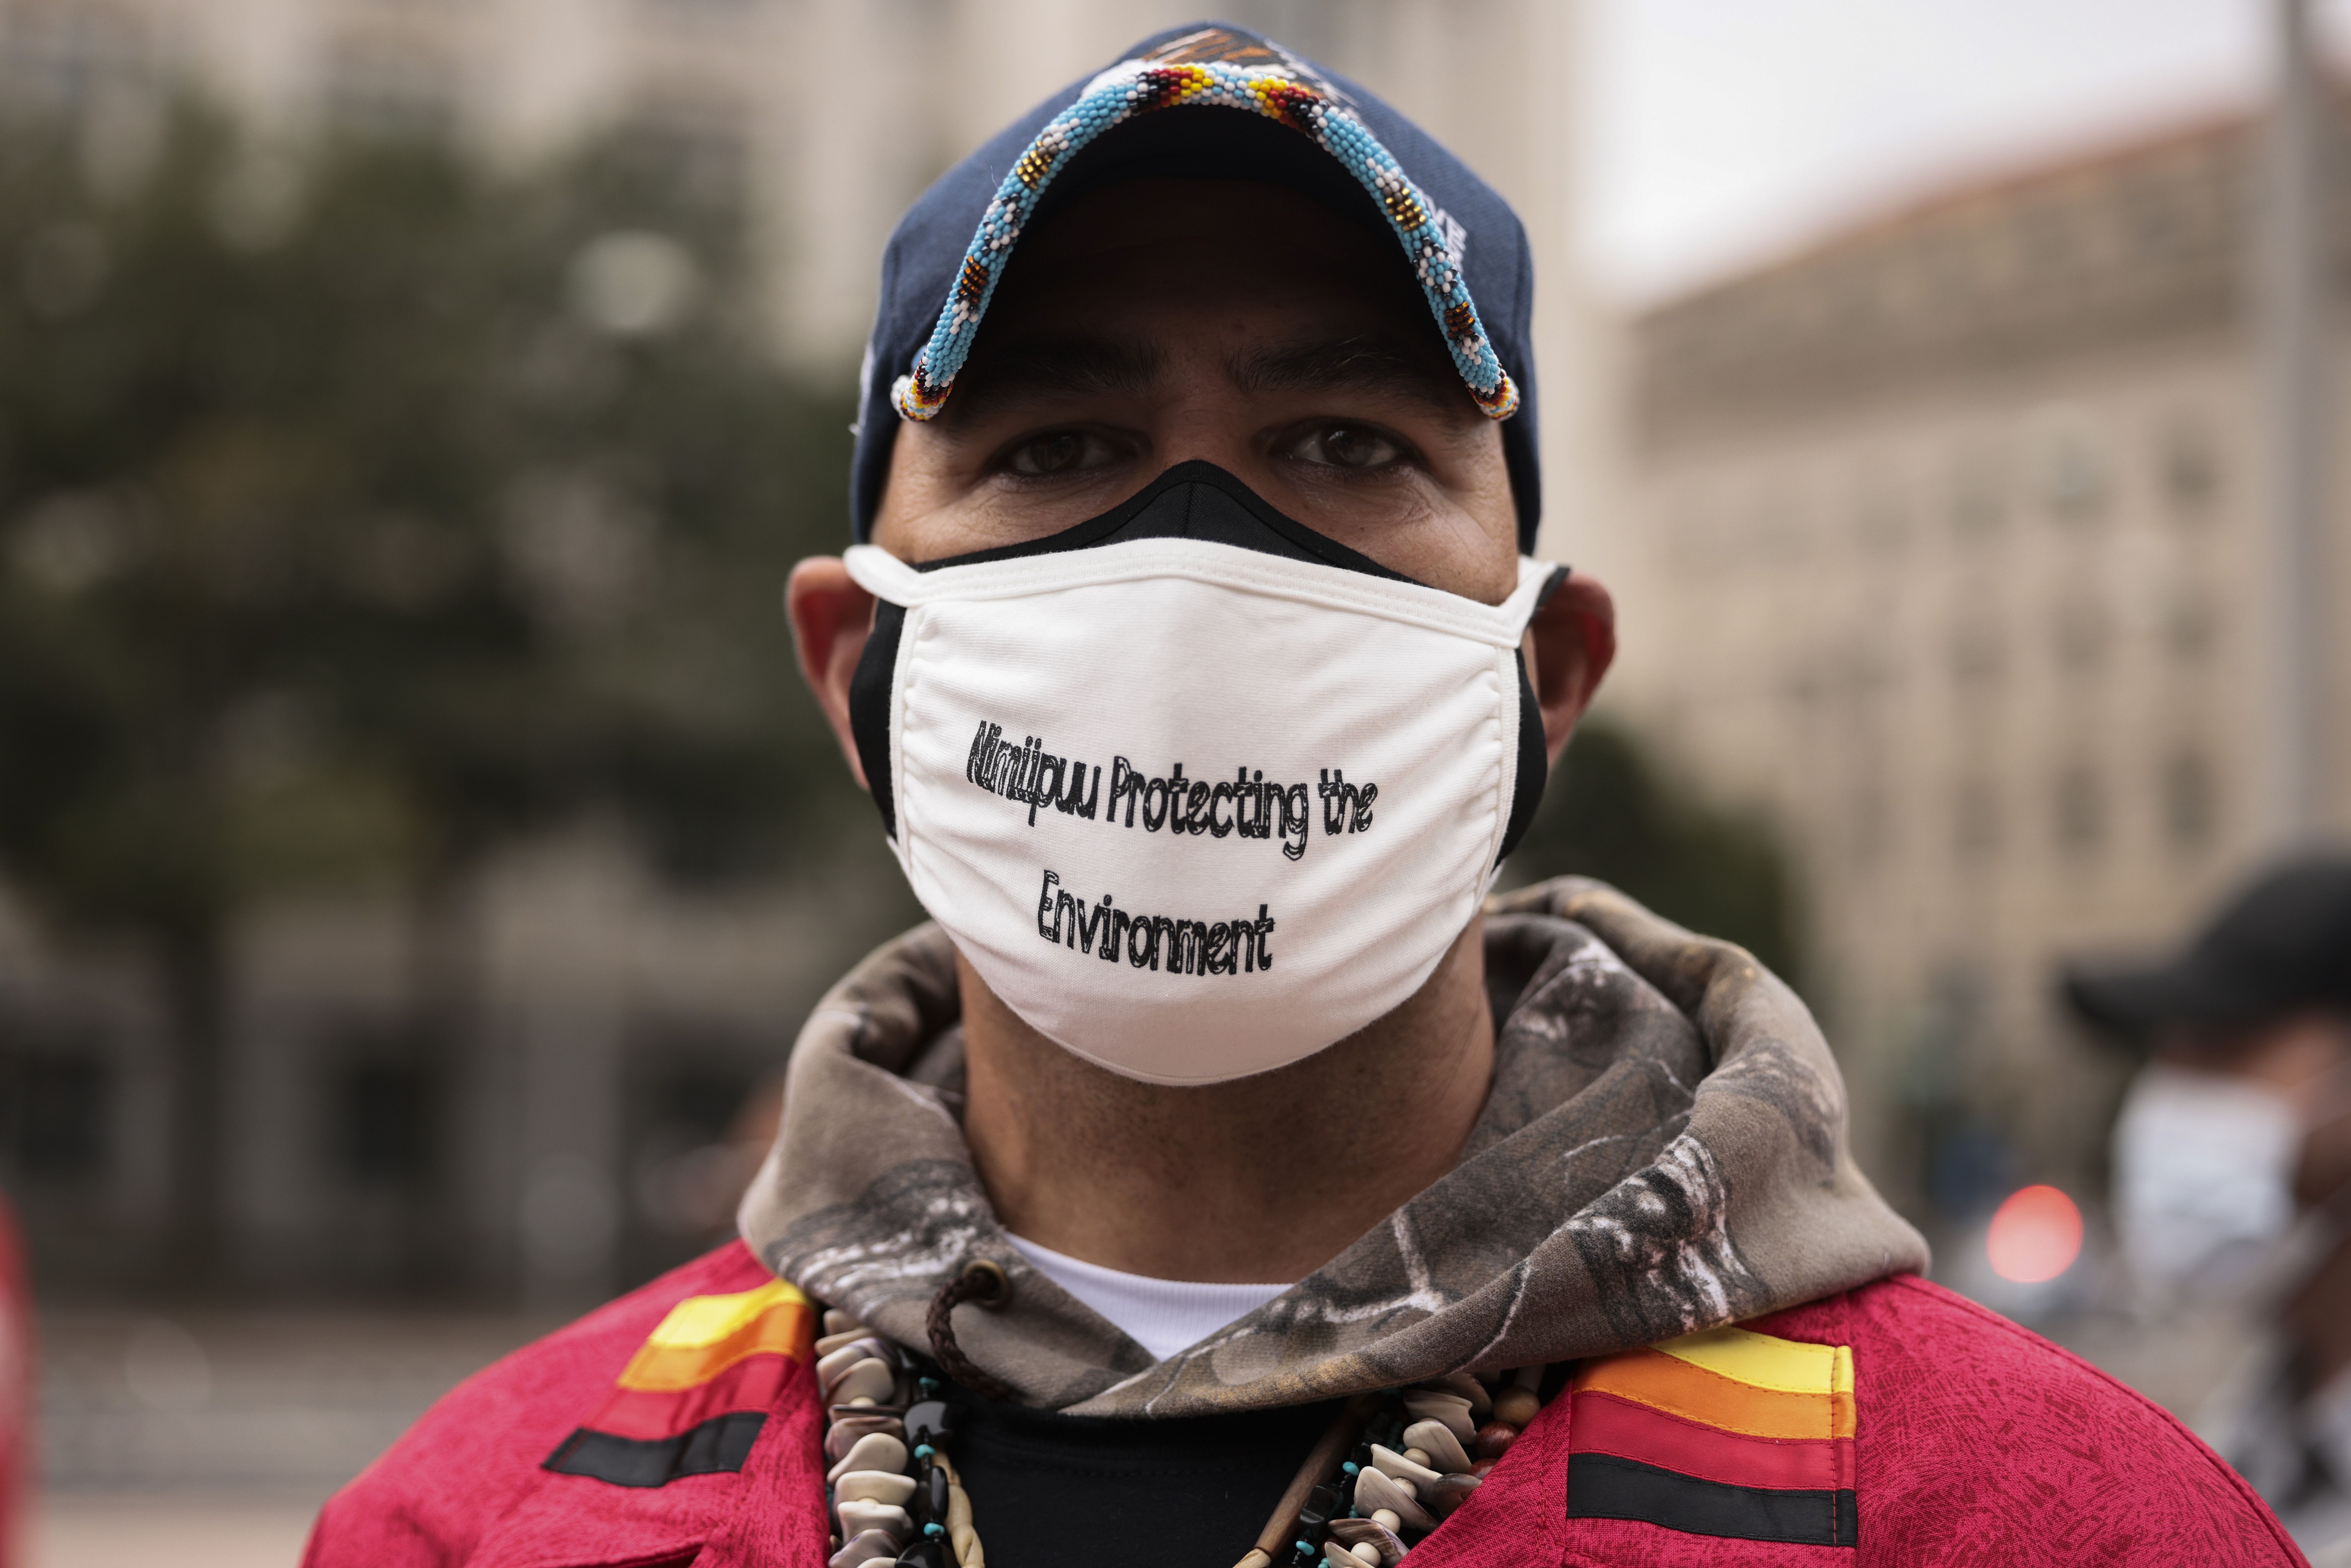 A man with a facemask advocating for environmental protection poses for a portrait 